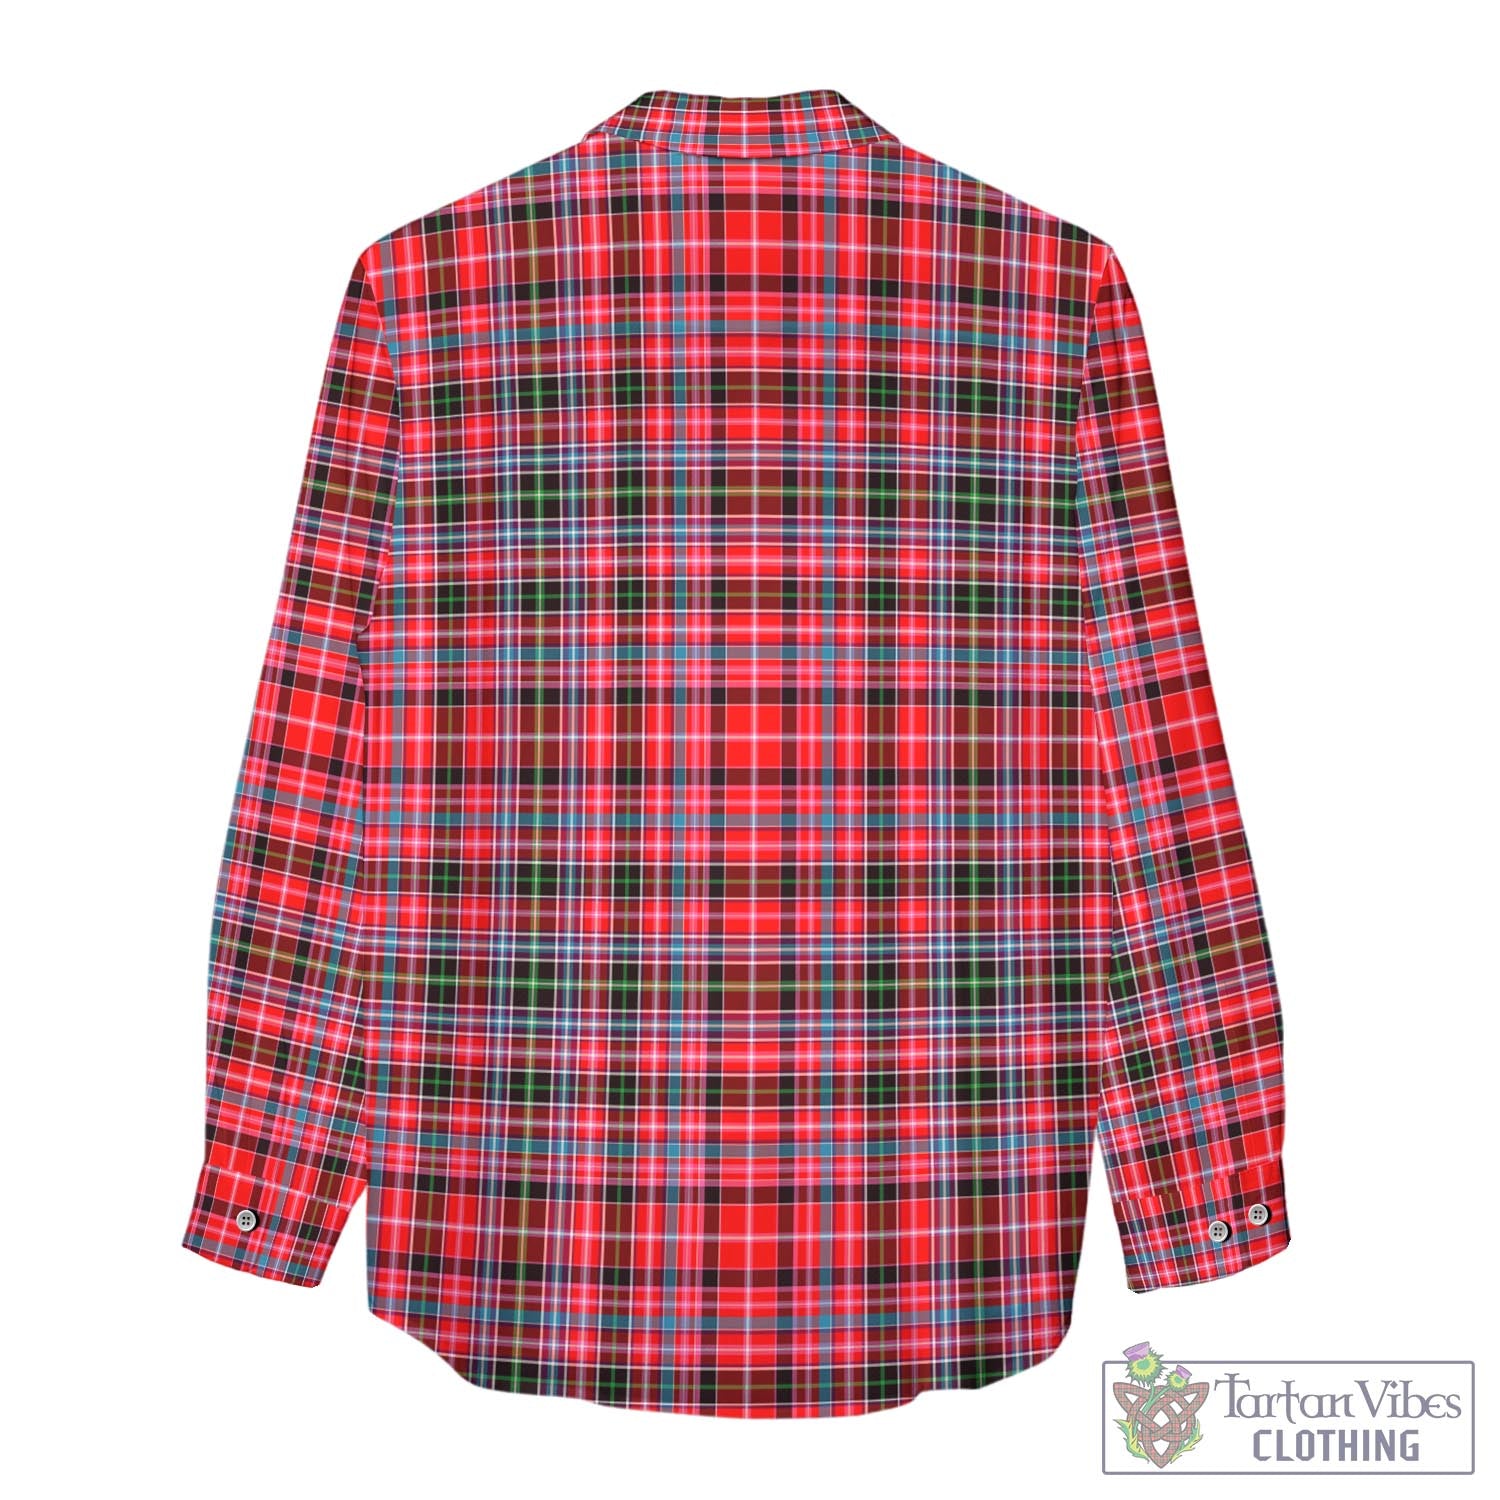 Tartan Vibes Clothing Udny Tartan Womens Casual Shirt with Family Crest